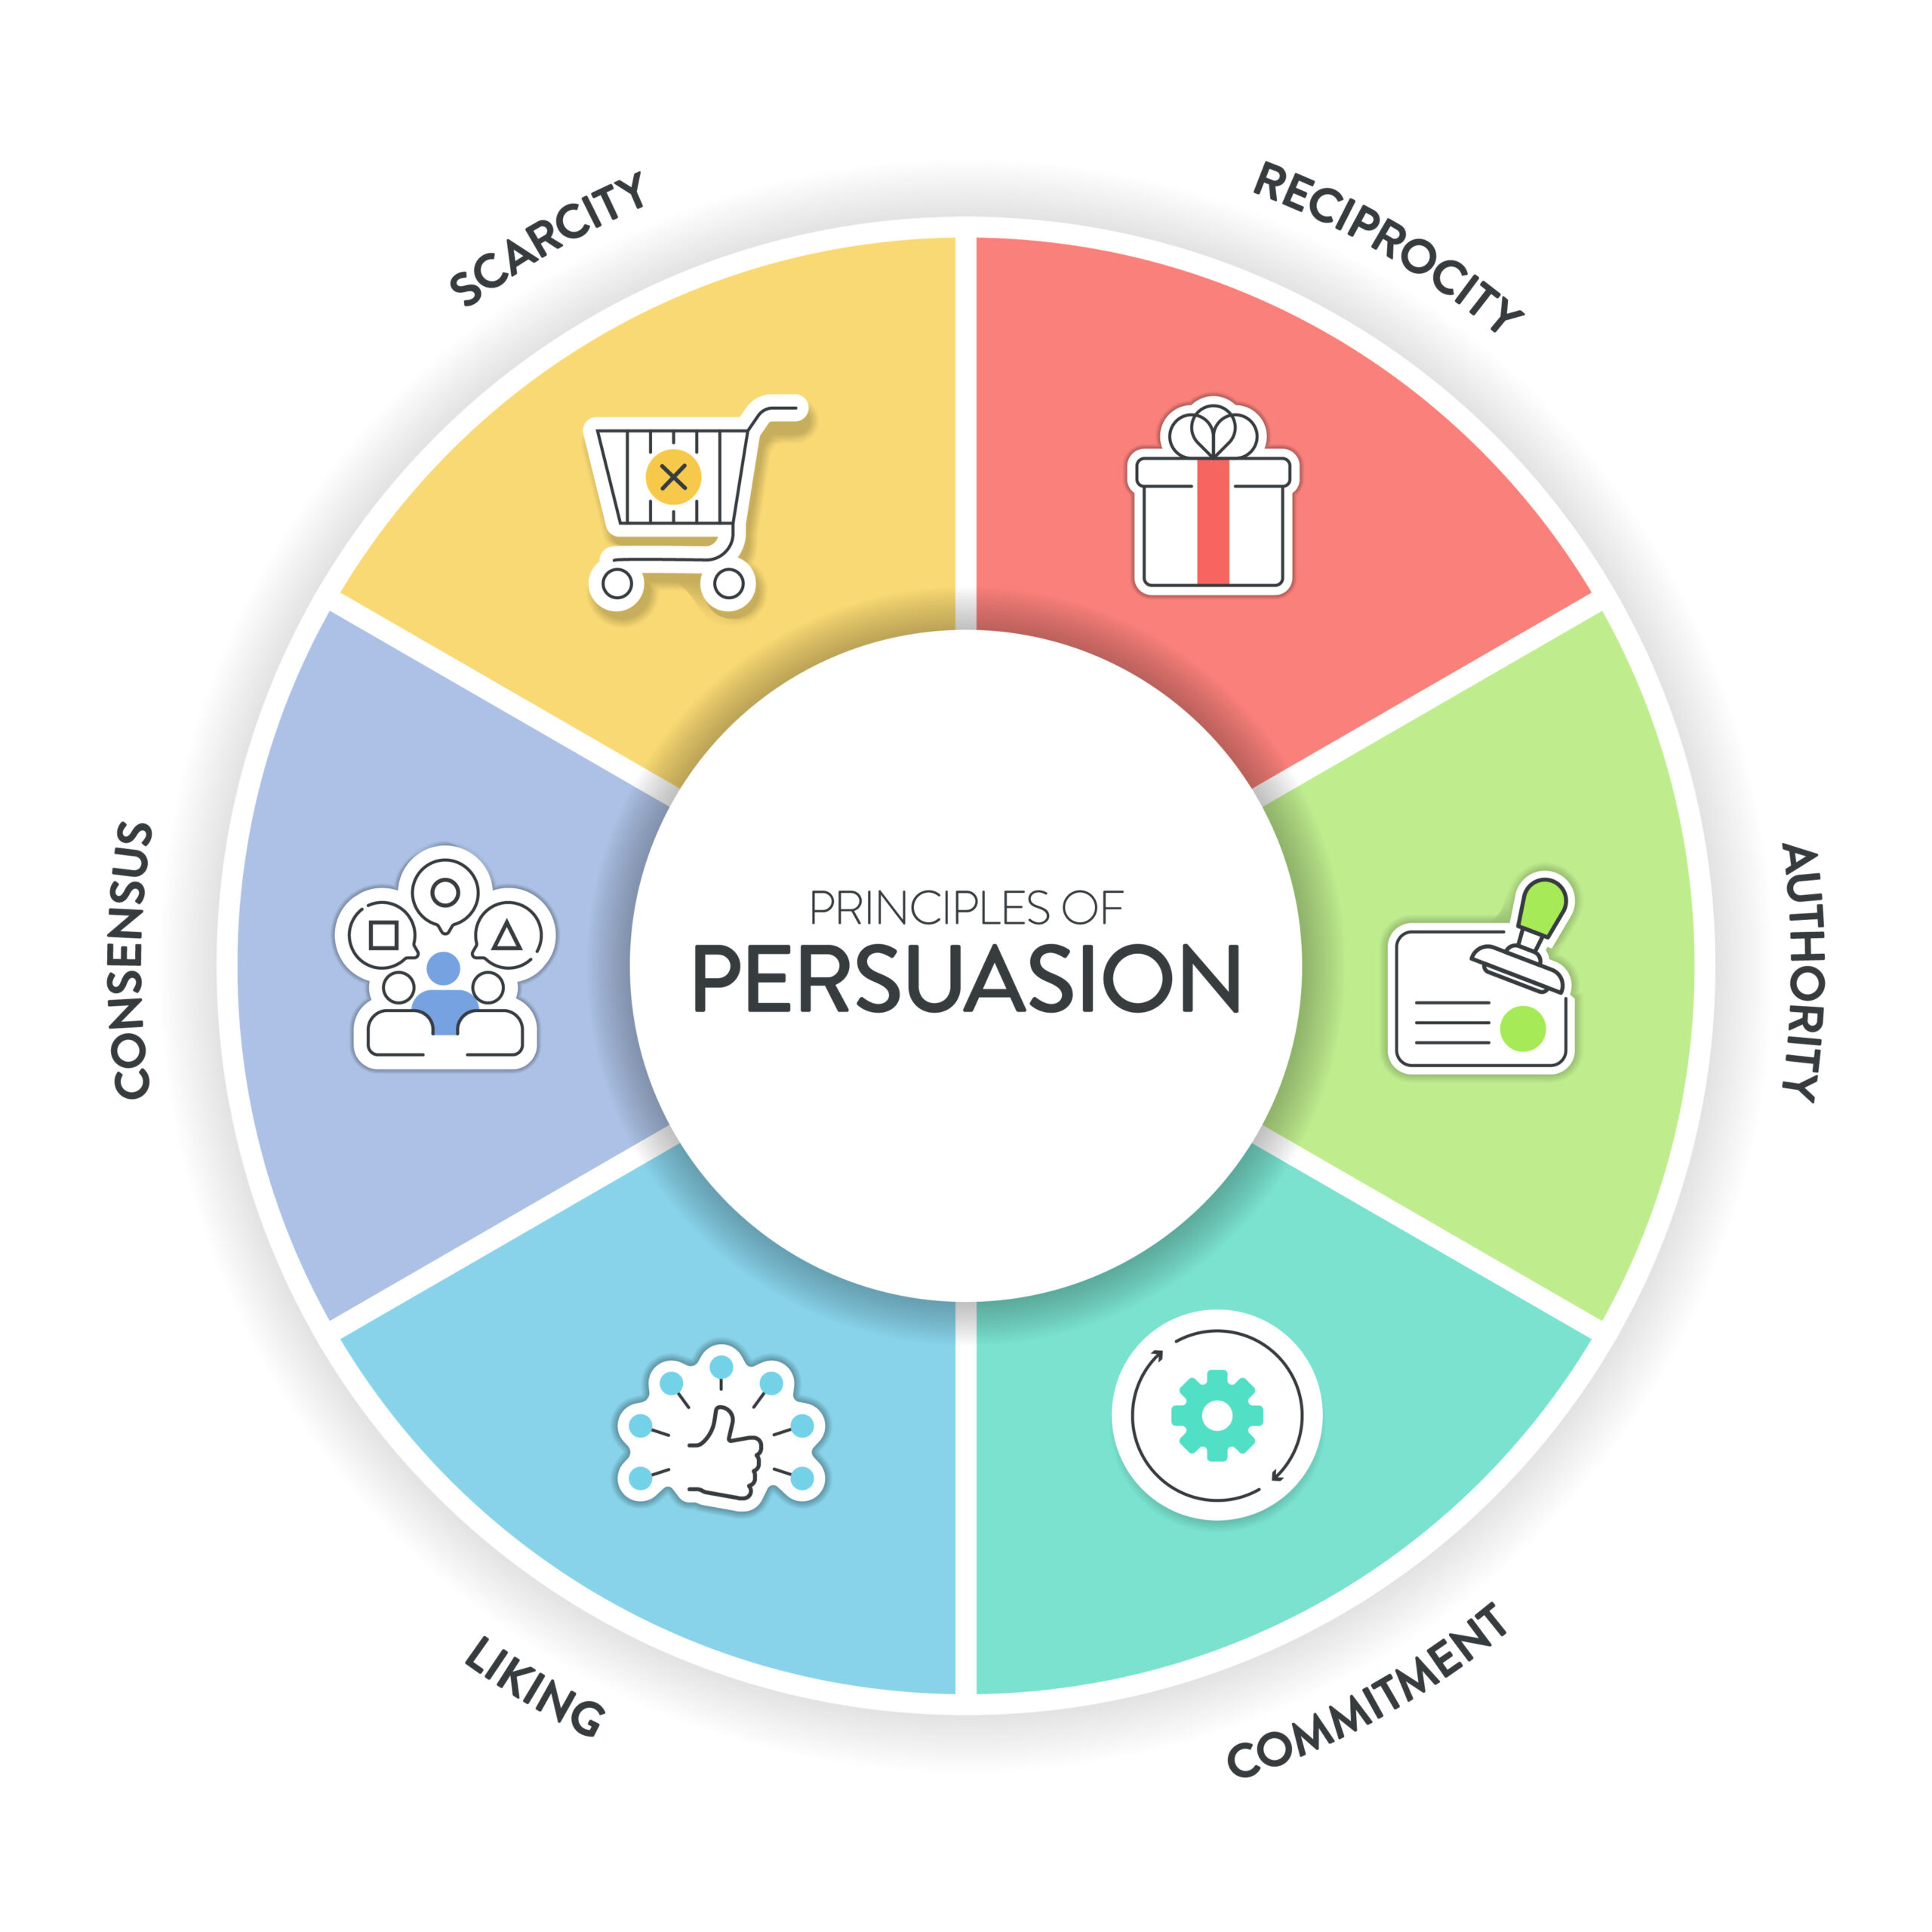 mastering influence - principles of persuasion